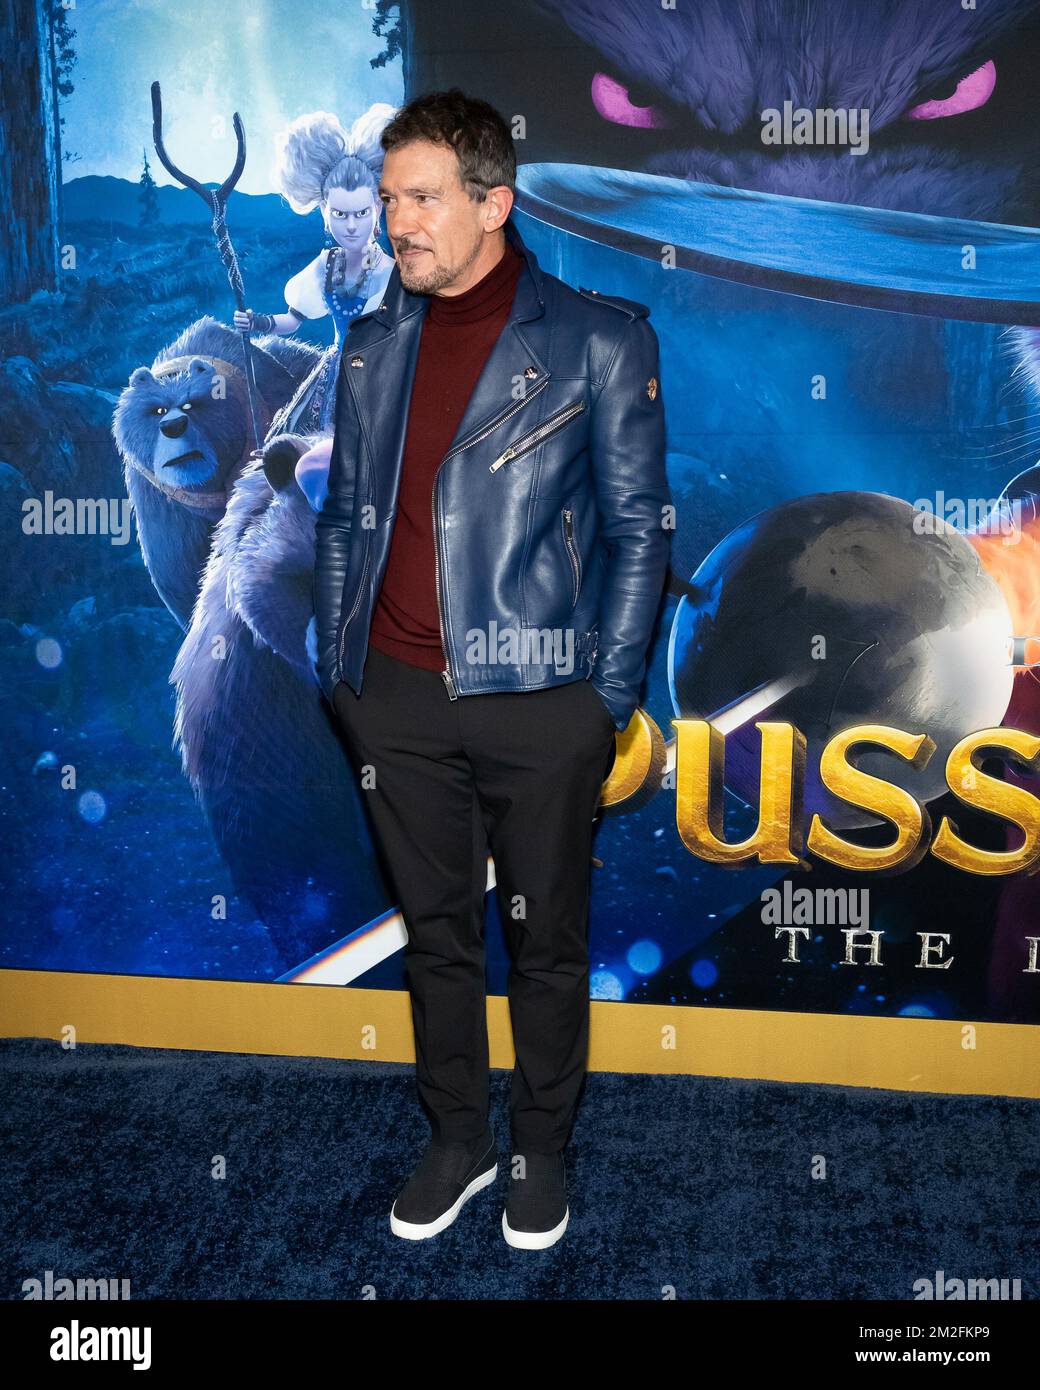 New York, USA. 13th Dec, 2022. Antonio Banderas arrives on the red carpet for the premiere of “Puss in Boots: The Last Wish“ at Jazz at Lincoln Center's Frederick P. Rose Hall in New York, New York, on Dec. 13, 2022. (Photo by Gabriele Holtermann/Sipa USA) Credit: Sipa USA/Alamy Live News Stock Photo